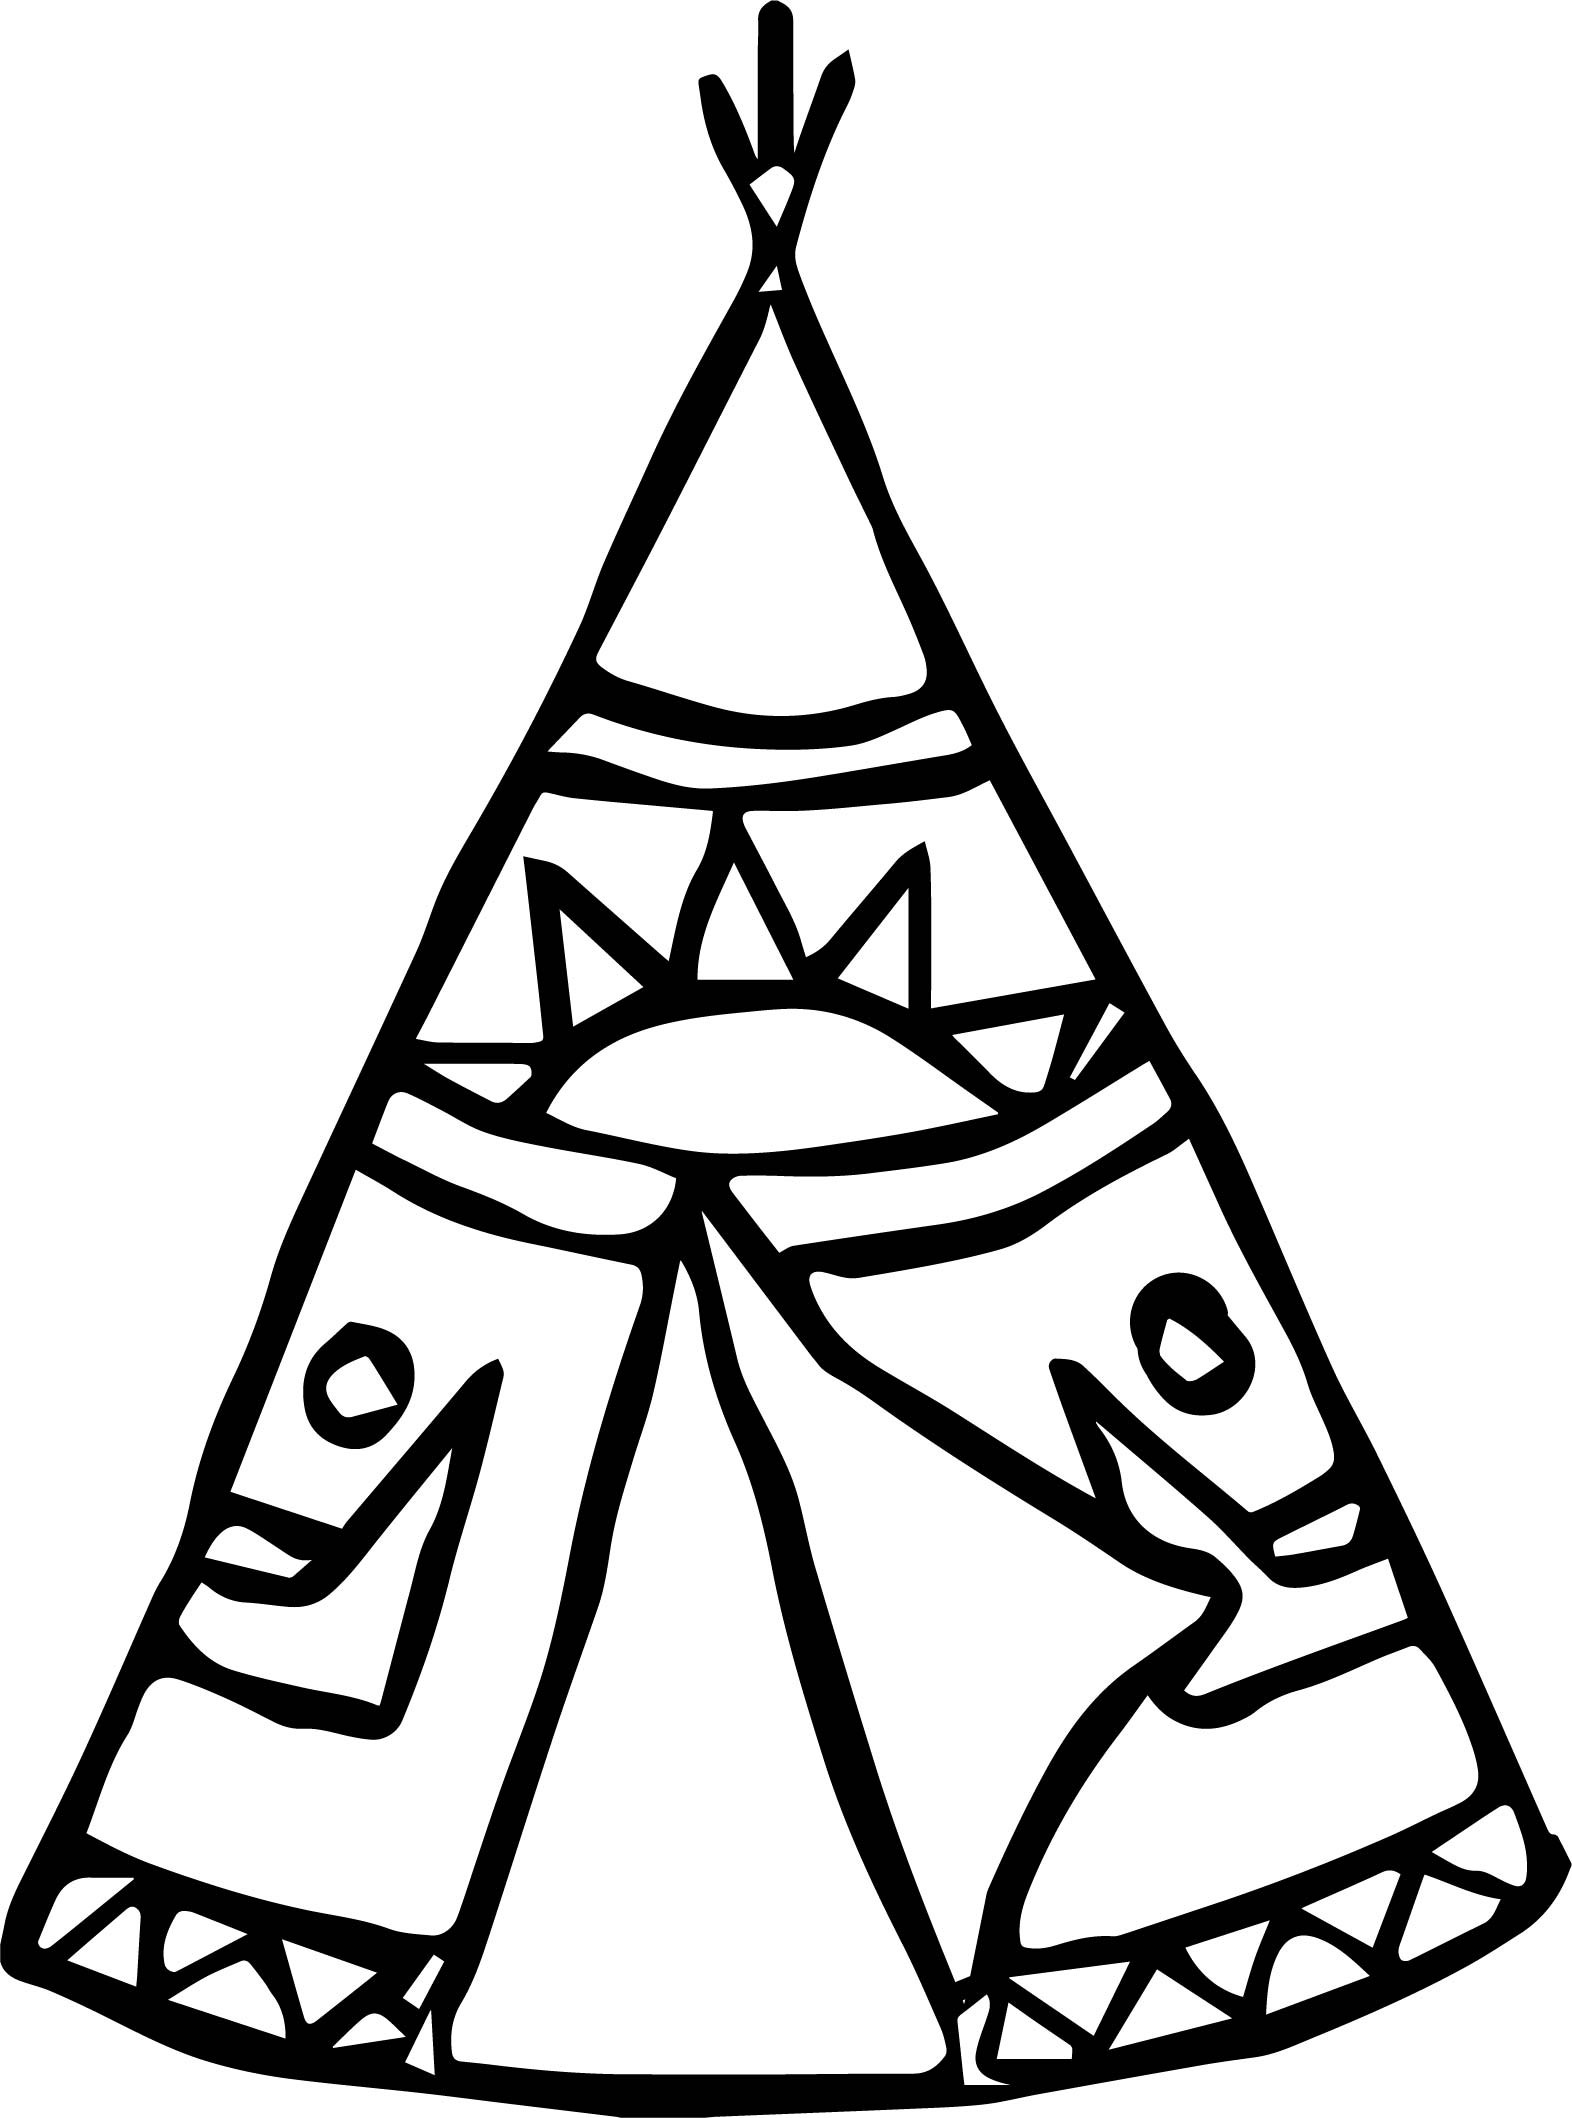 Tent Coloring Page at GetColorings.com | Free printable colorings pages